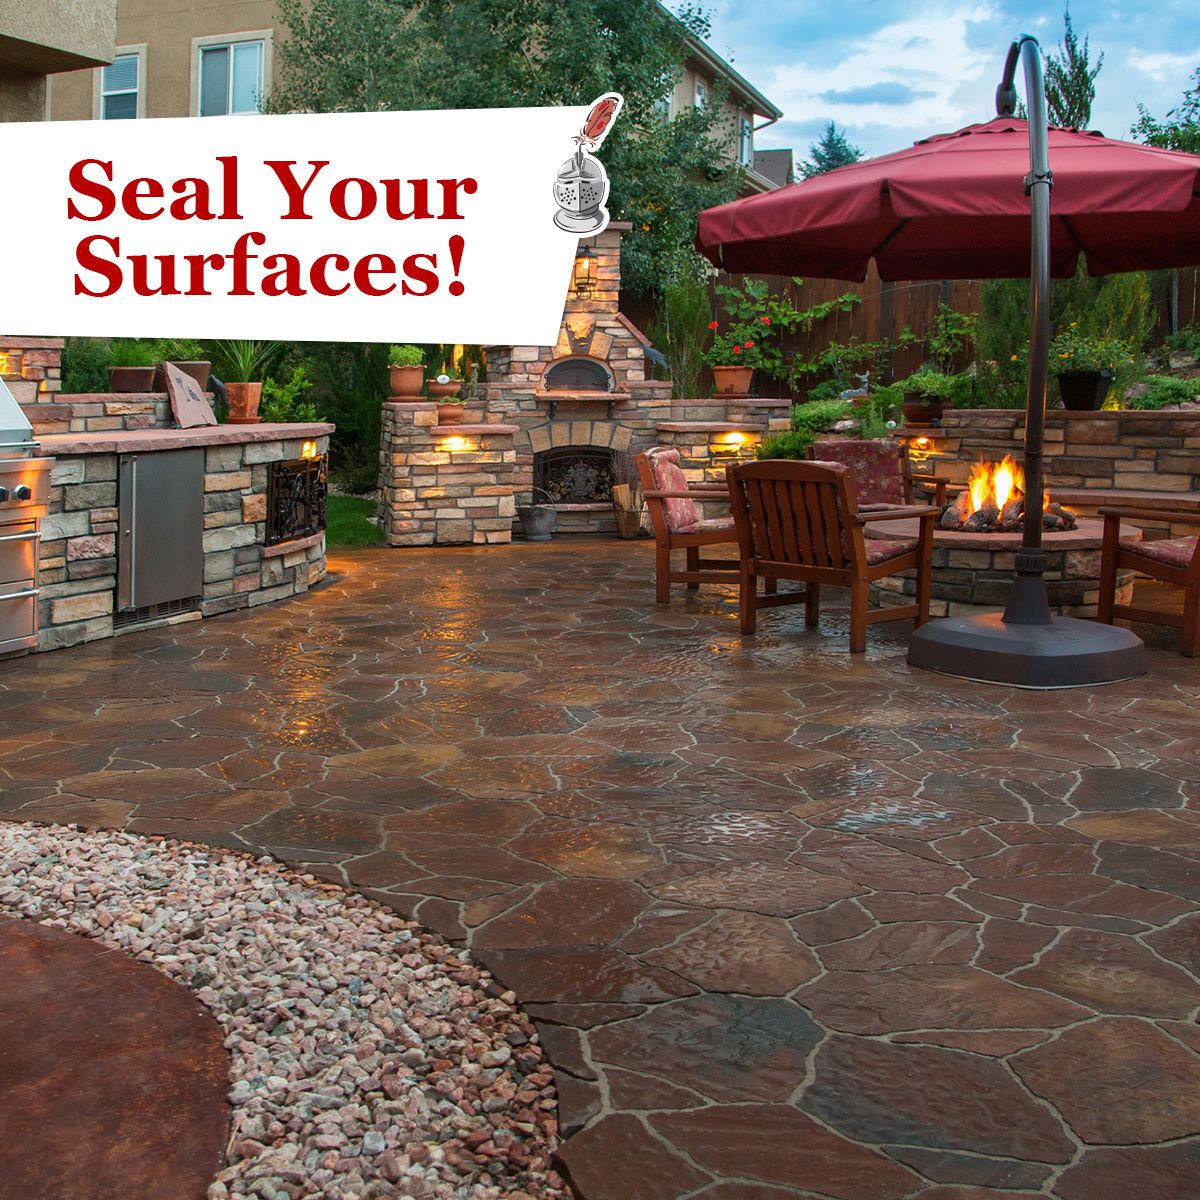 Seal Your Surfaces!